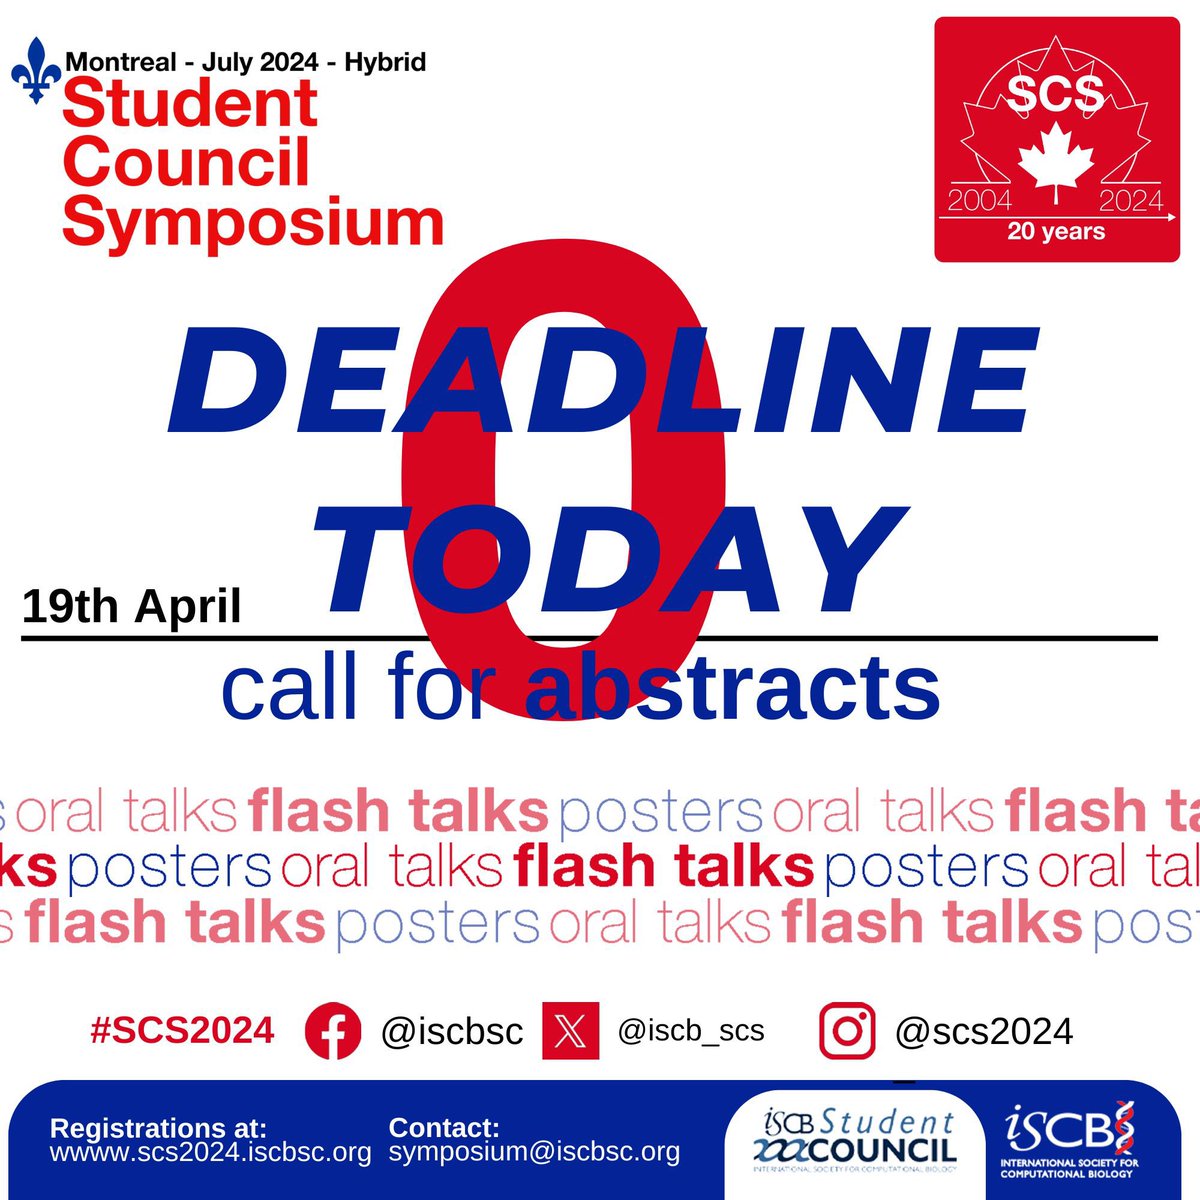 TODAY IS THE DEADLINE! Last chance to submit your abstracts for the ISCB Student Council Symposium 2024 #SCS2024 * Submit your abstract here before it's too late: iscb.org/ismb2024/submi… Deadline: TODAY, until 11:59 PM (any time zone)